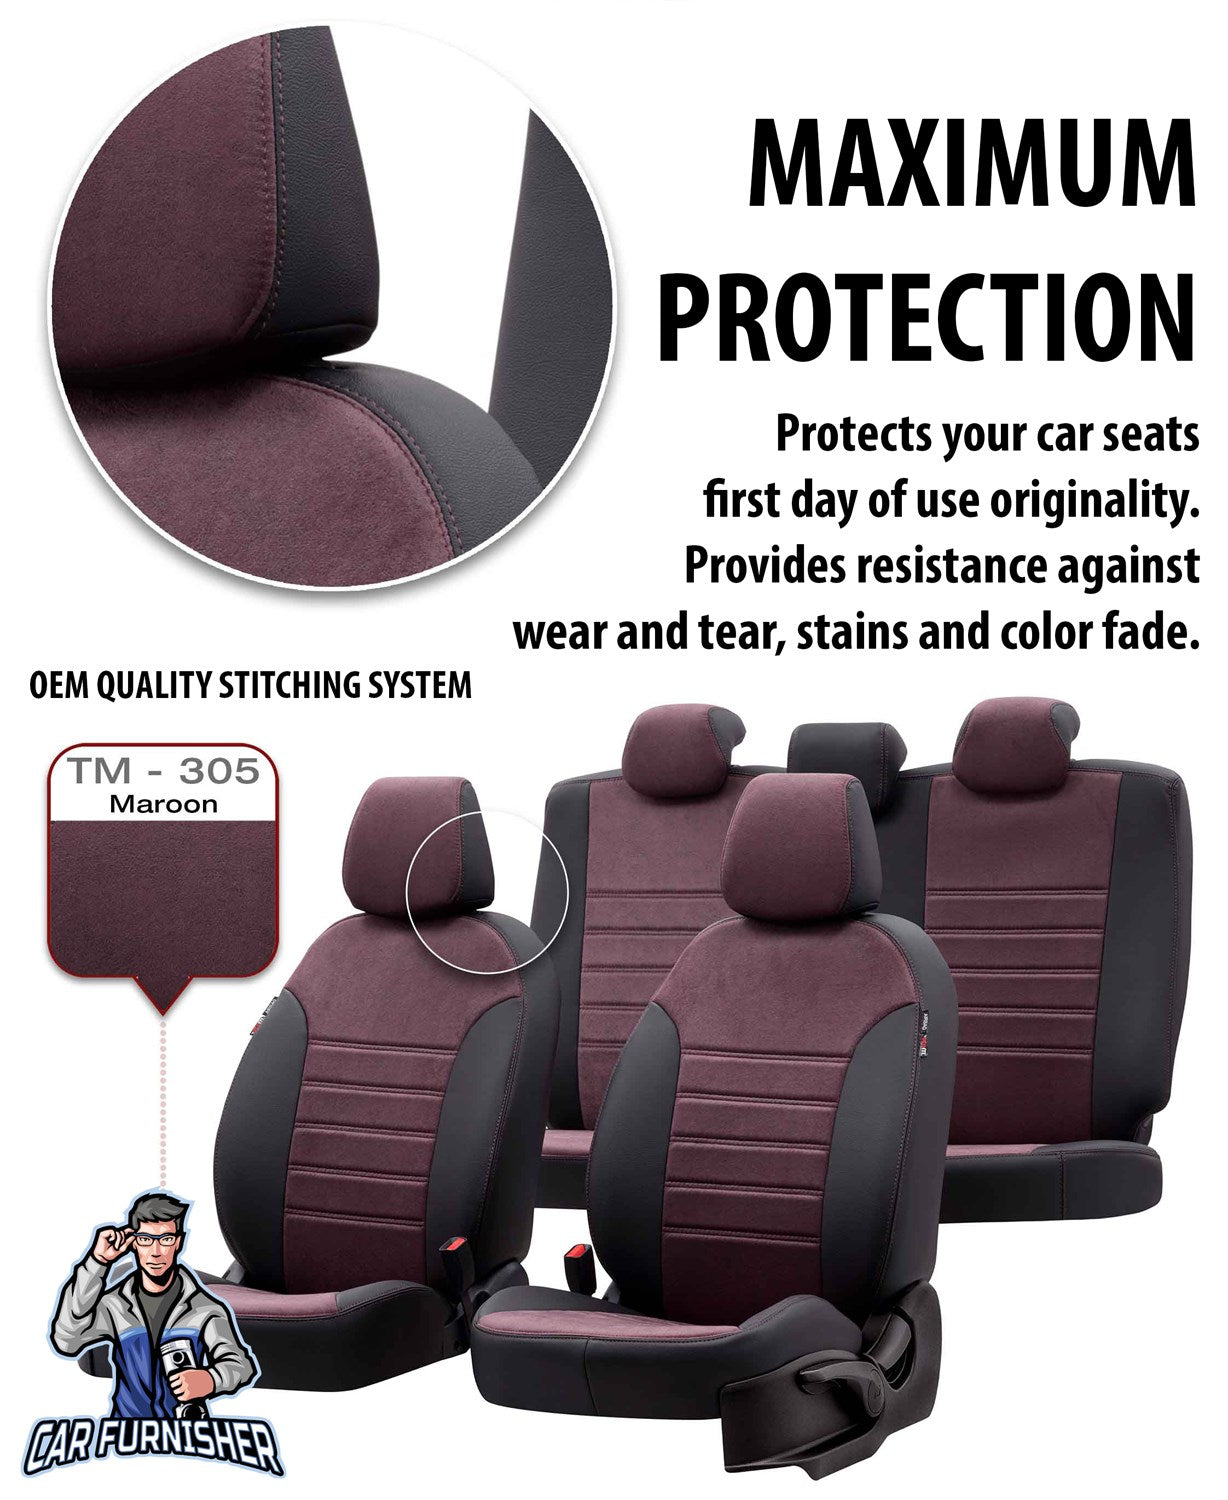 Kia XCeed Seat Covers Milano Suede Design Burgundy Leather & Suede Fabric